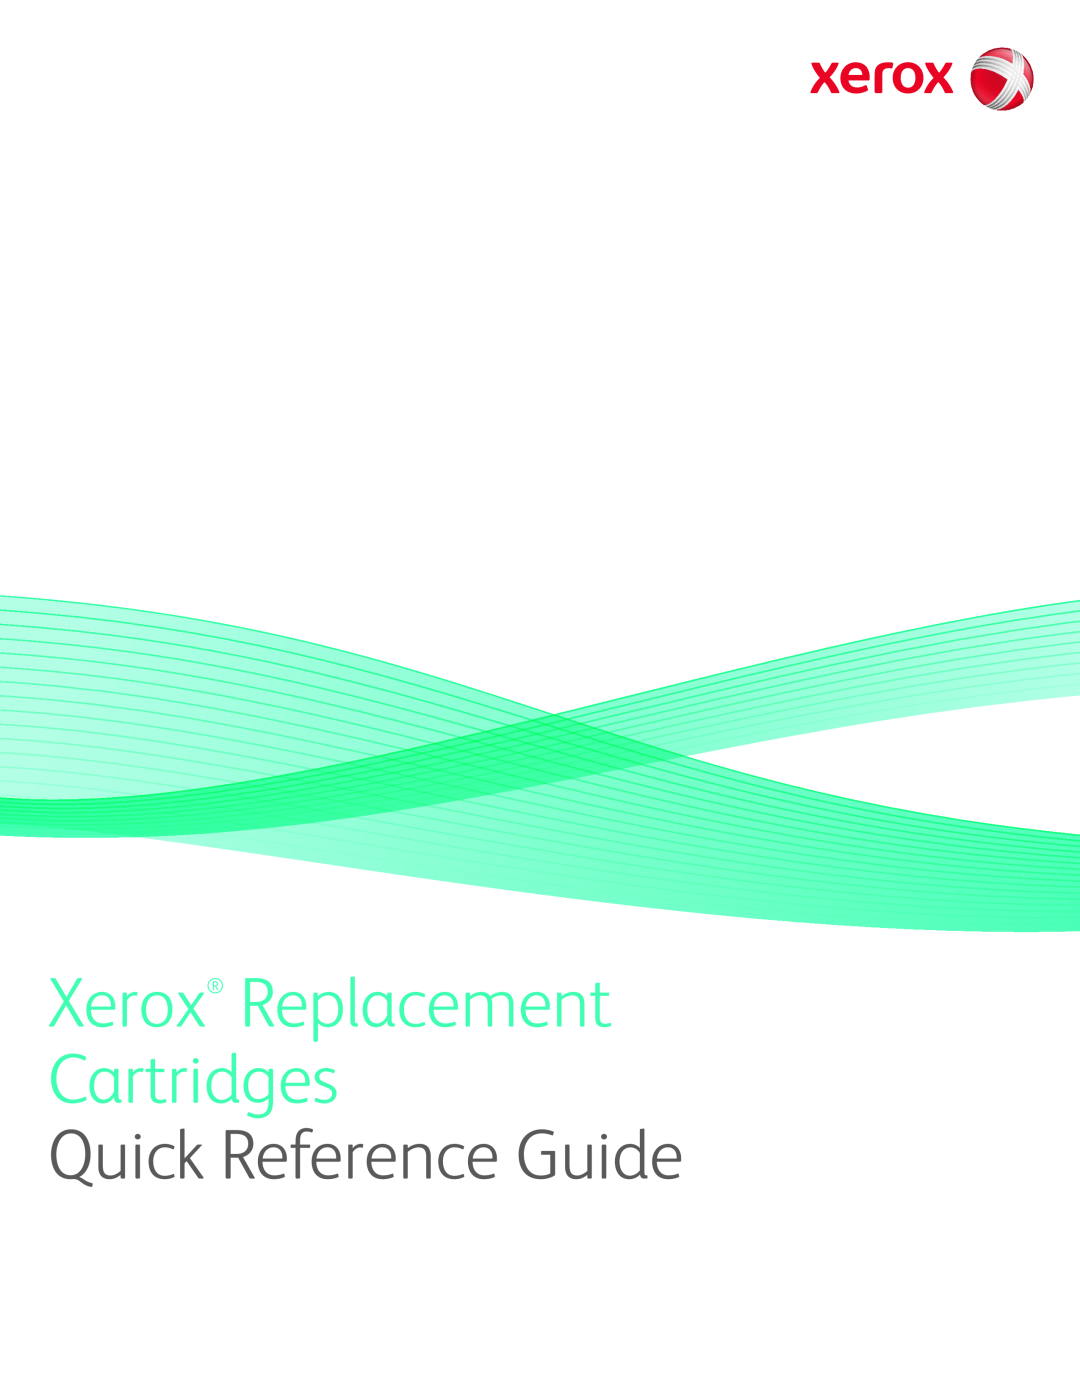 Xerox C9721A, C9722A, 6R944, C9720A, LJ4600, C9723A, 6R943, 6R942 manual Quick Reference Guide, Xerox Replacement Cartridges 